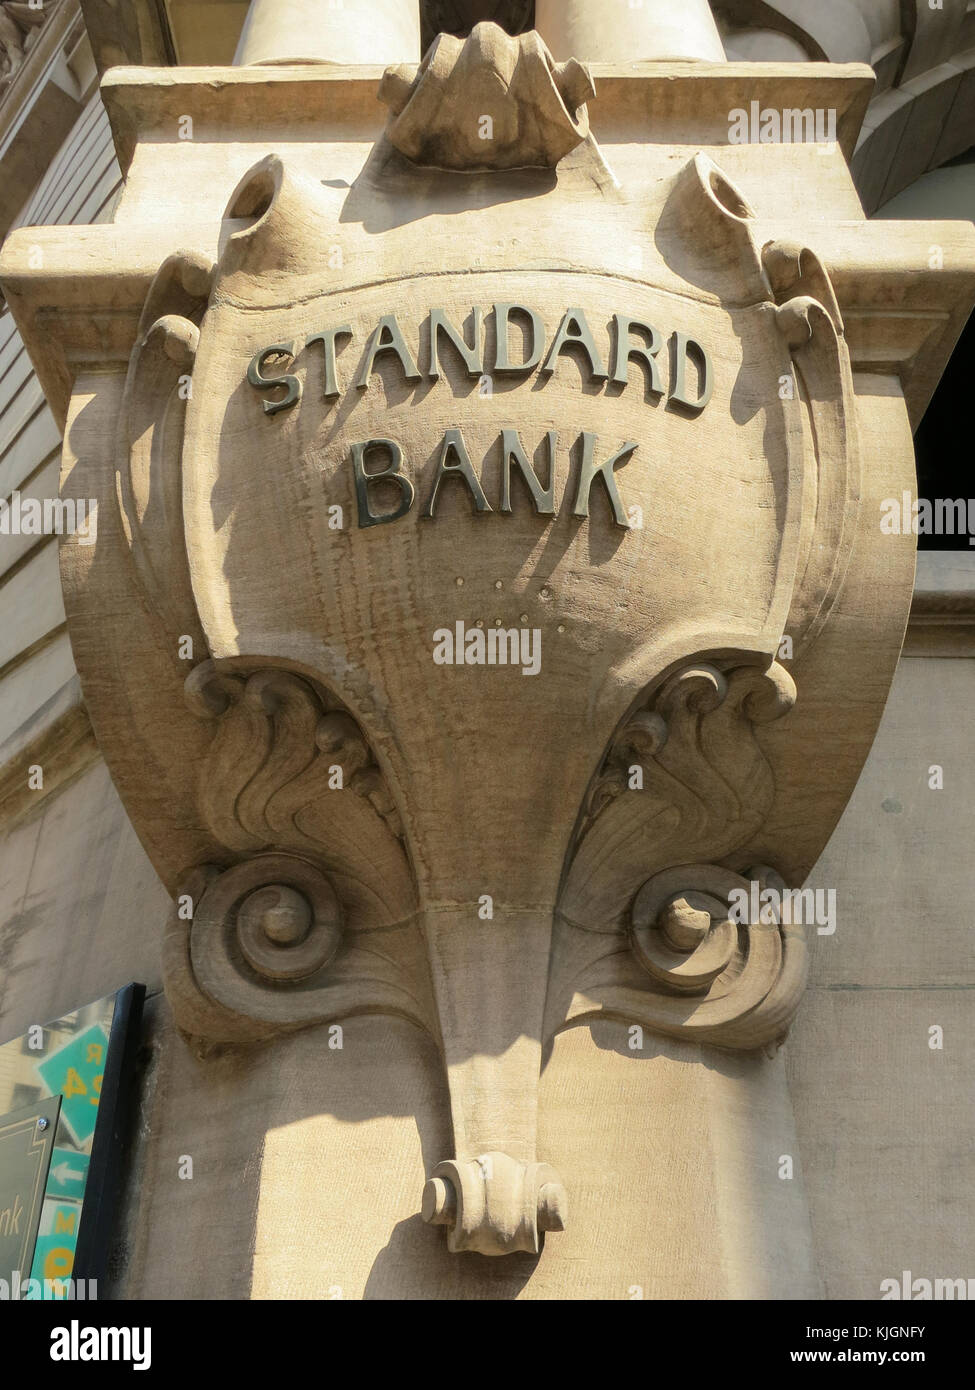 Johannesburg, South Africa - May 31, 2013: Standard Bank in Johannesburg, South Africa. Stock Photo